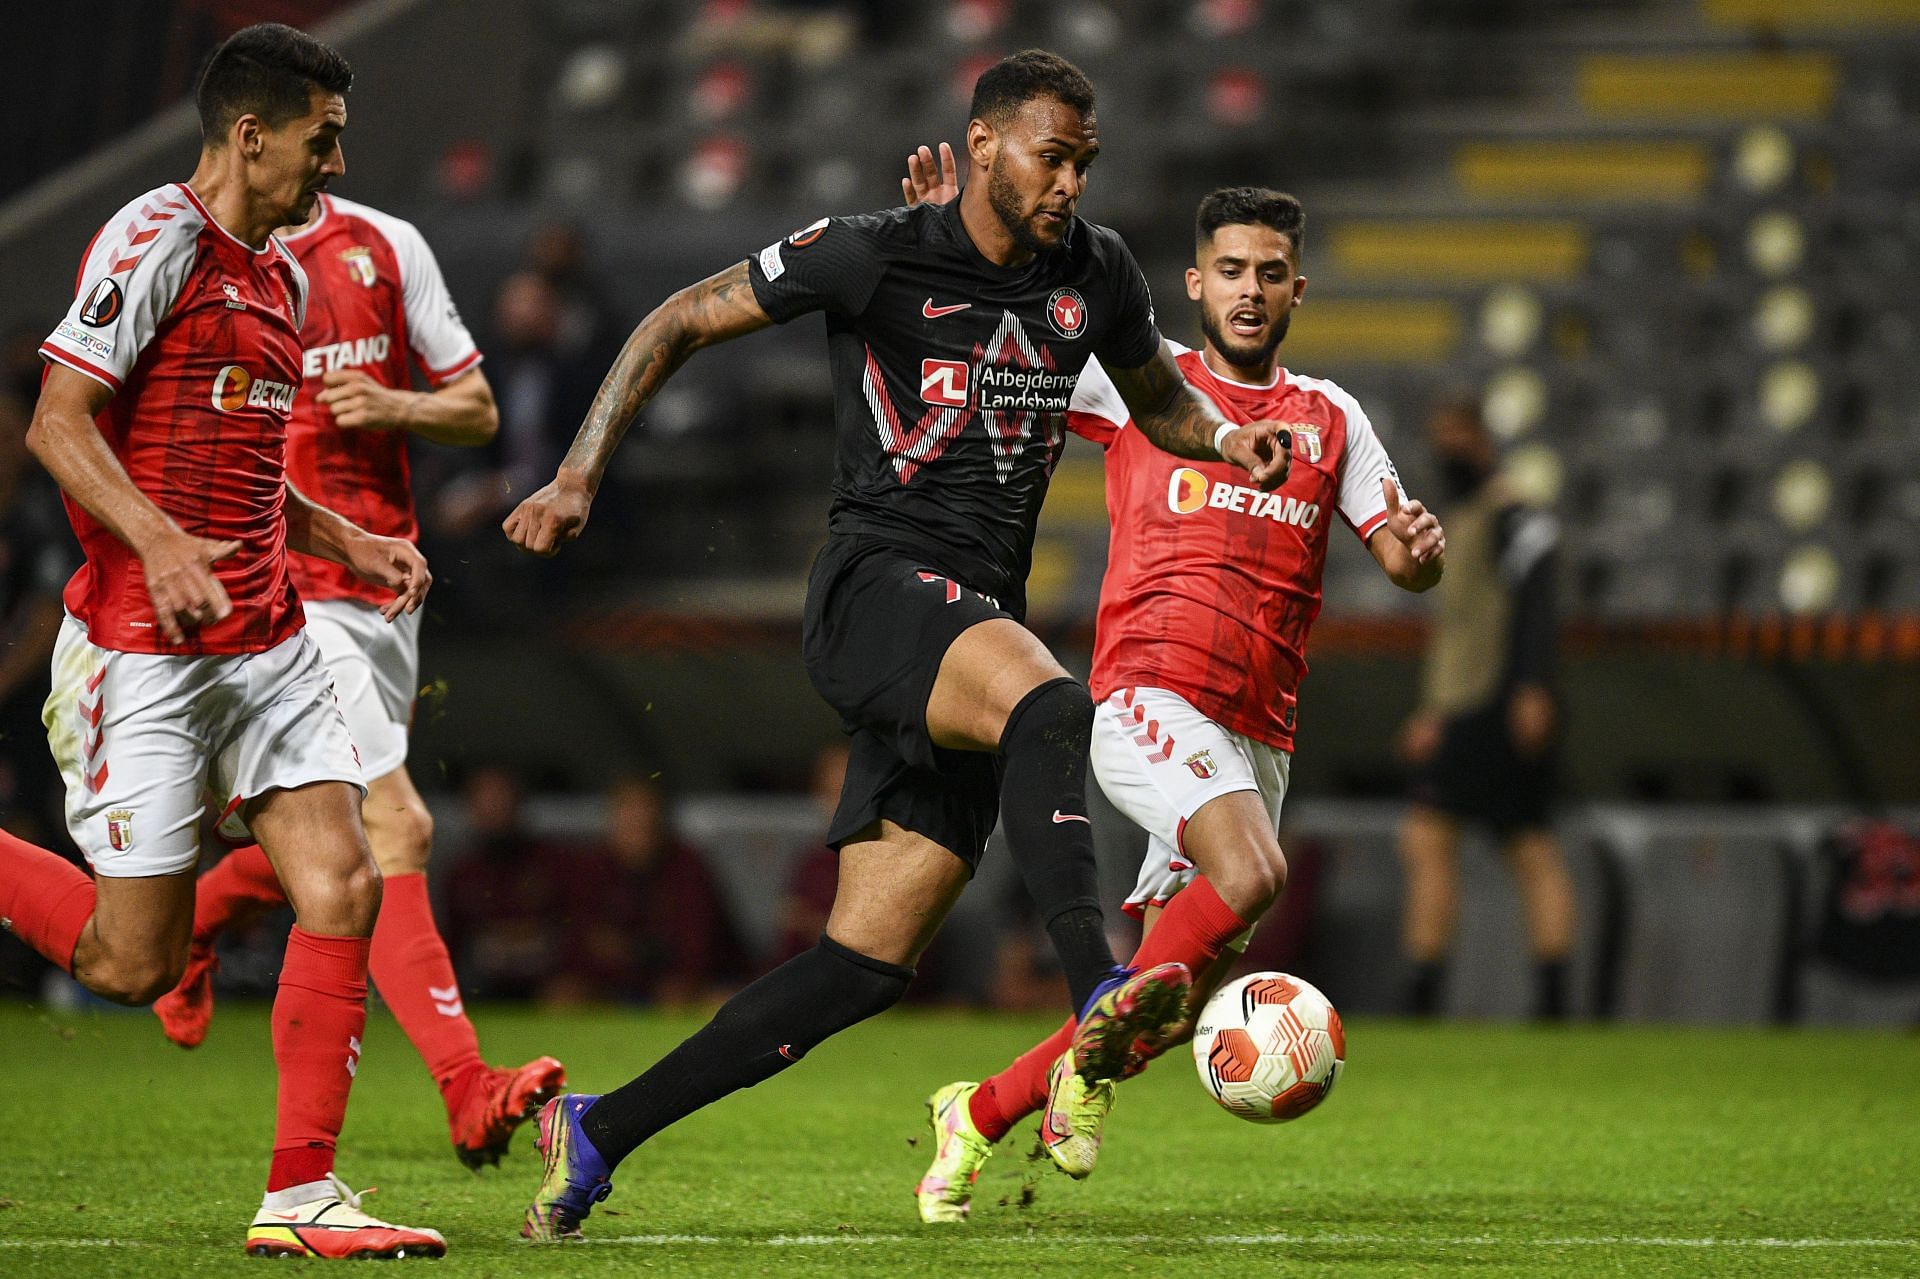 AS Monaco and Sporting Braga square off on Thursday